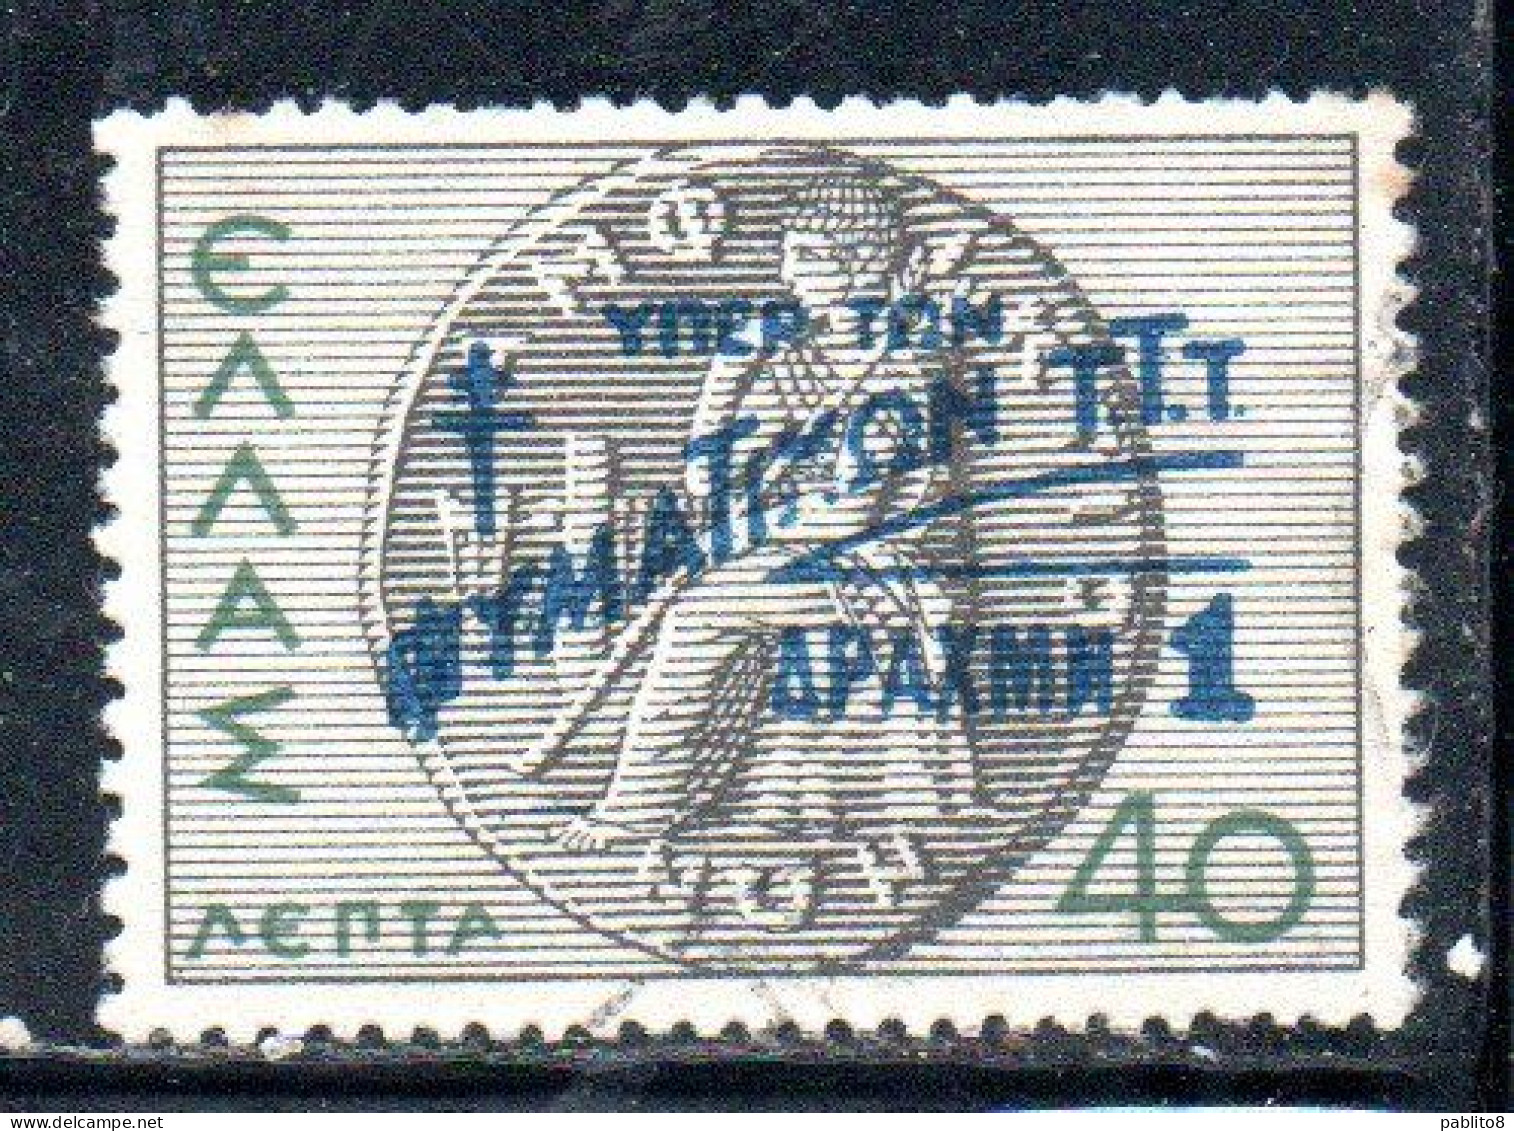 GREECE GRECIA ELLAS 1945 POSTAL TAX STAMPS TUBERCULOSIS SURCHARGED 1d On 40l USED USATO OBLITERE' - Steuermarken